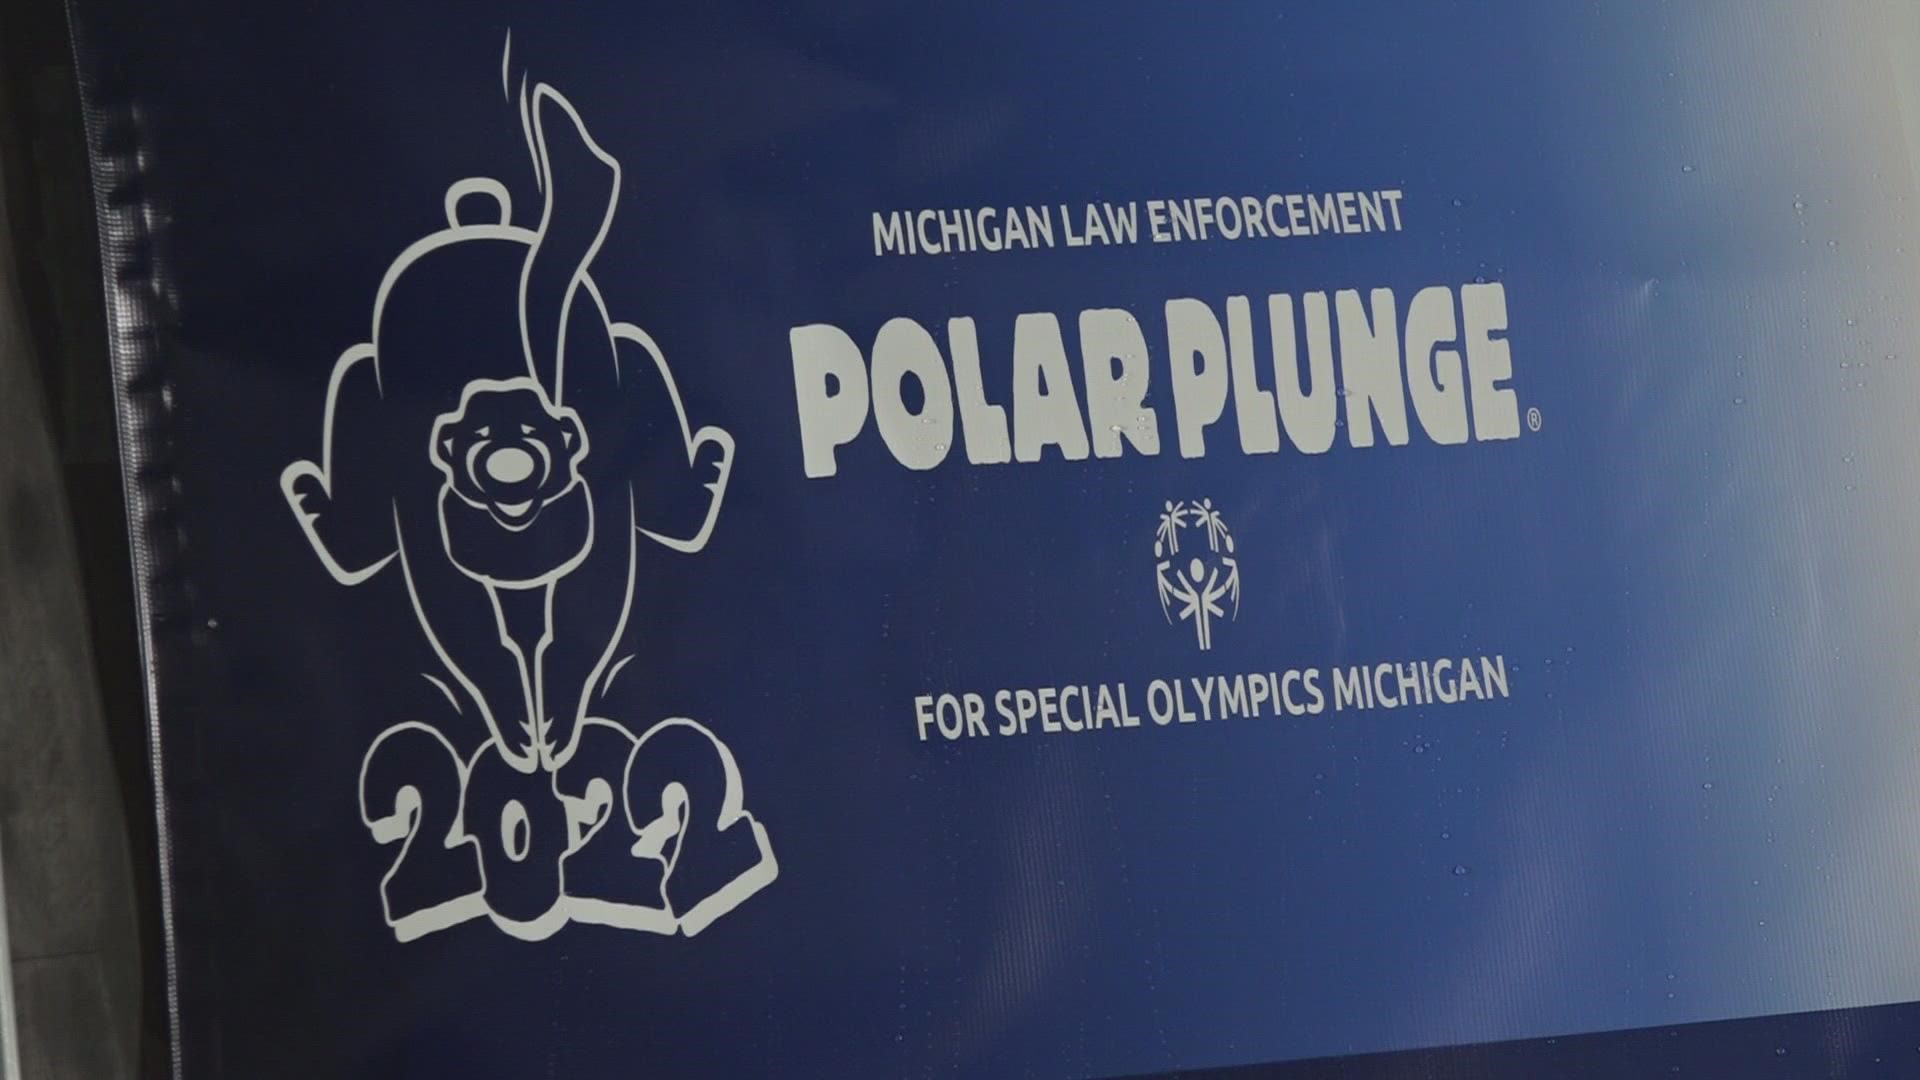 It's the start of the 2022 Polar Plunge season for Special Olympics Michigan.